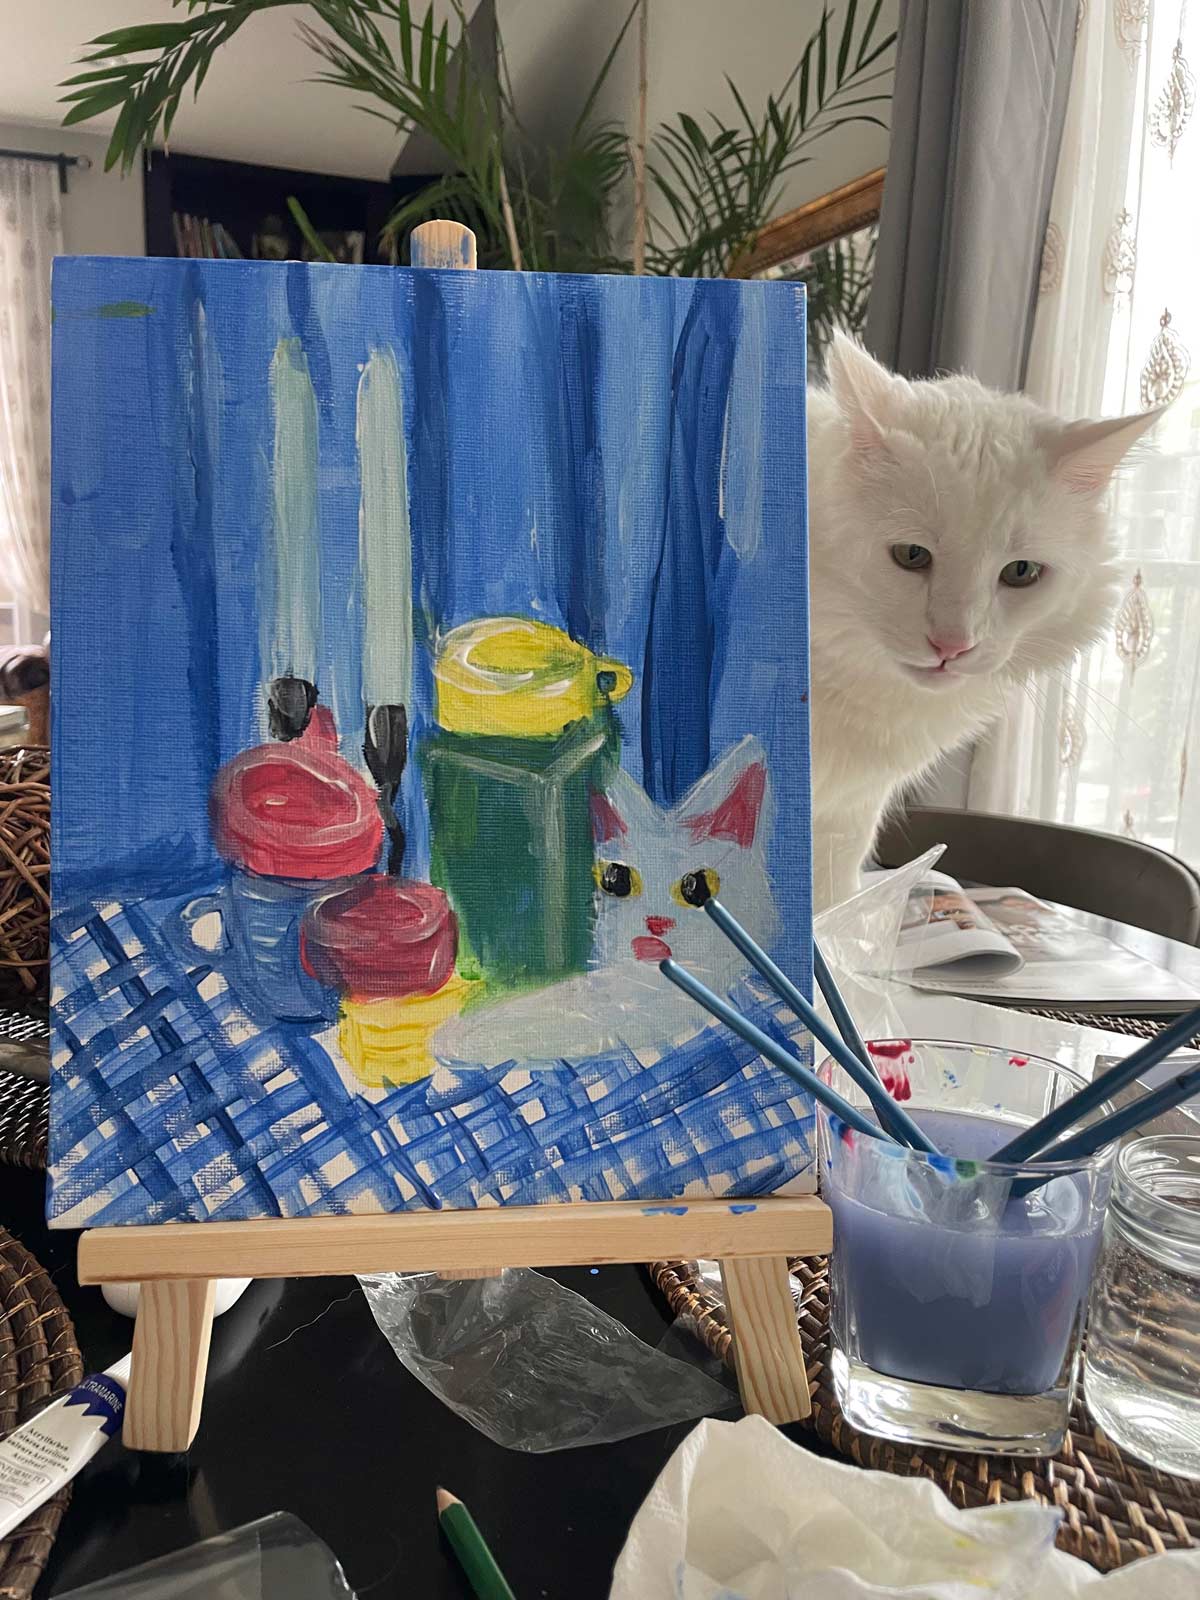 My recent art piece ‘Composition with the cat’